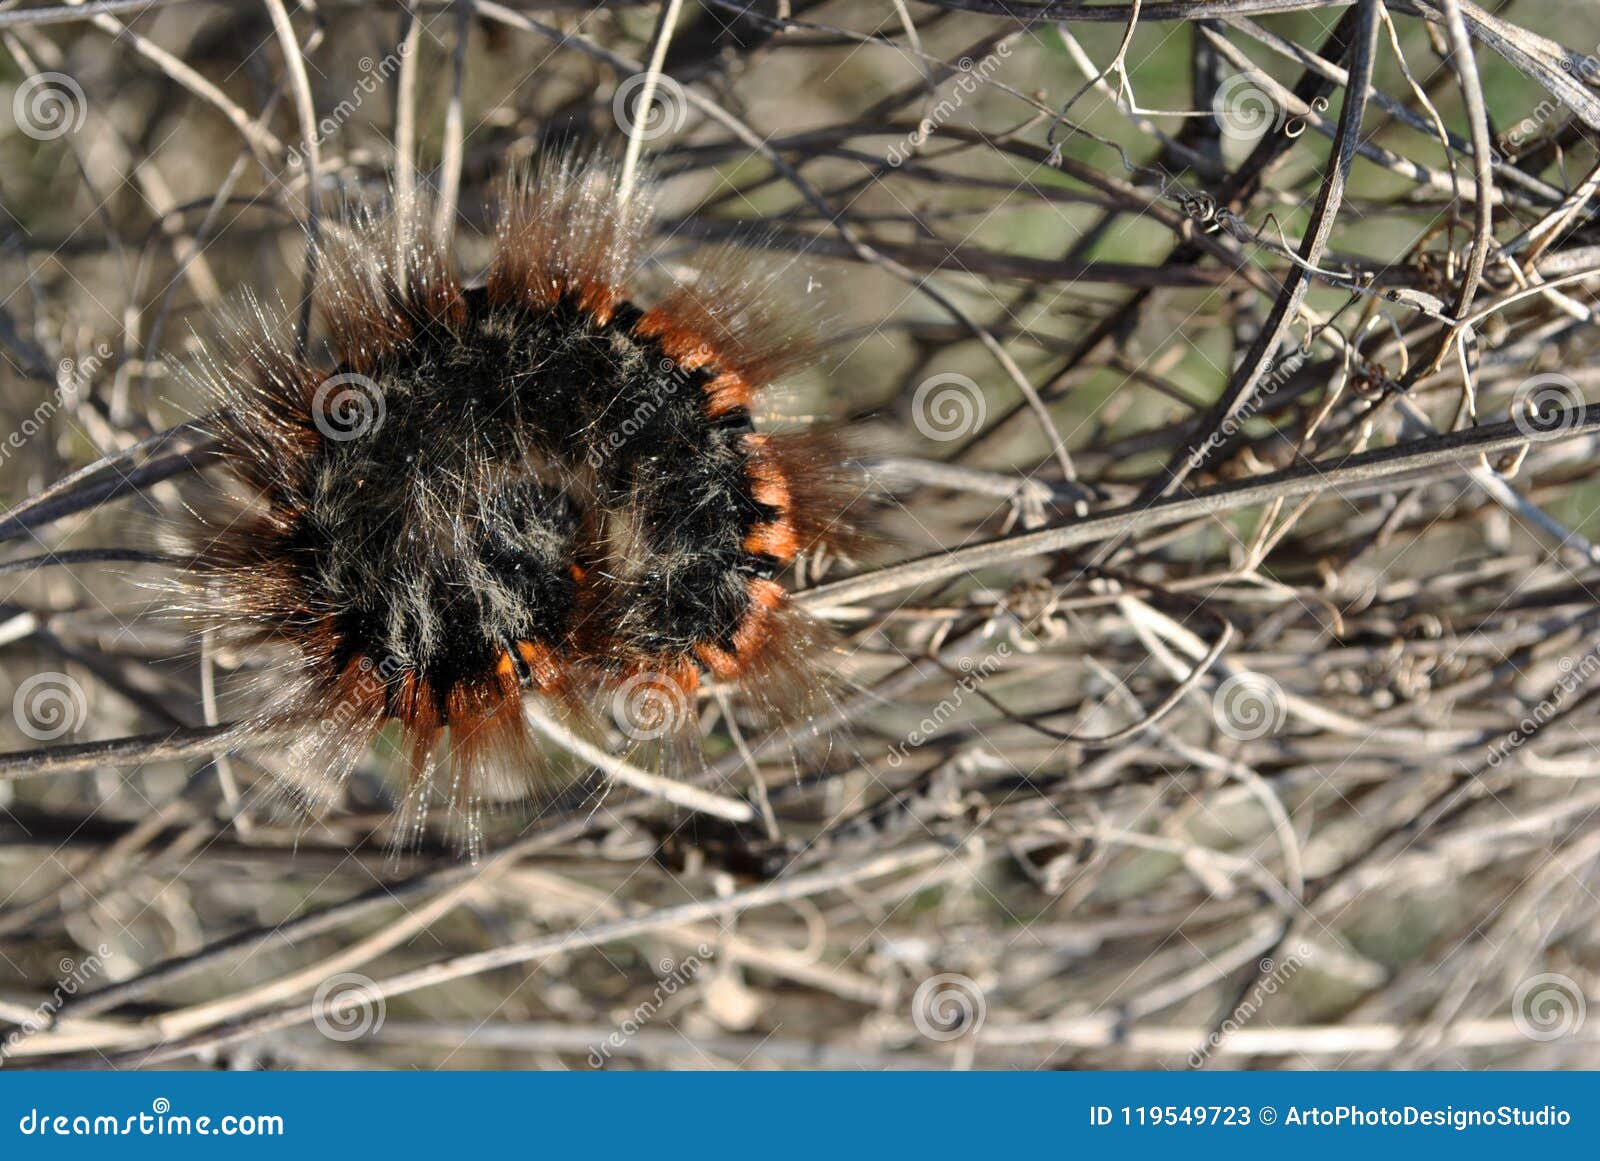 lasiocampidae caterpillar laying on the branch